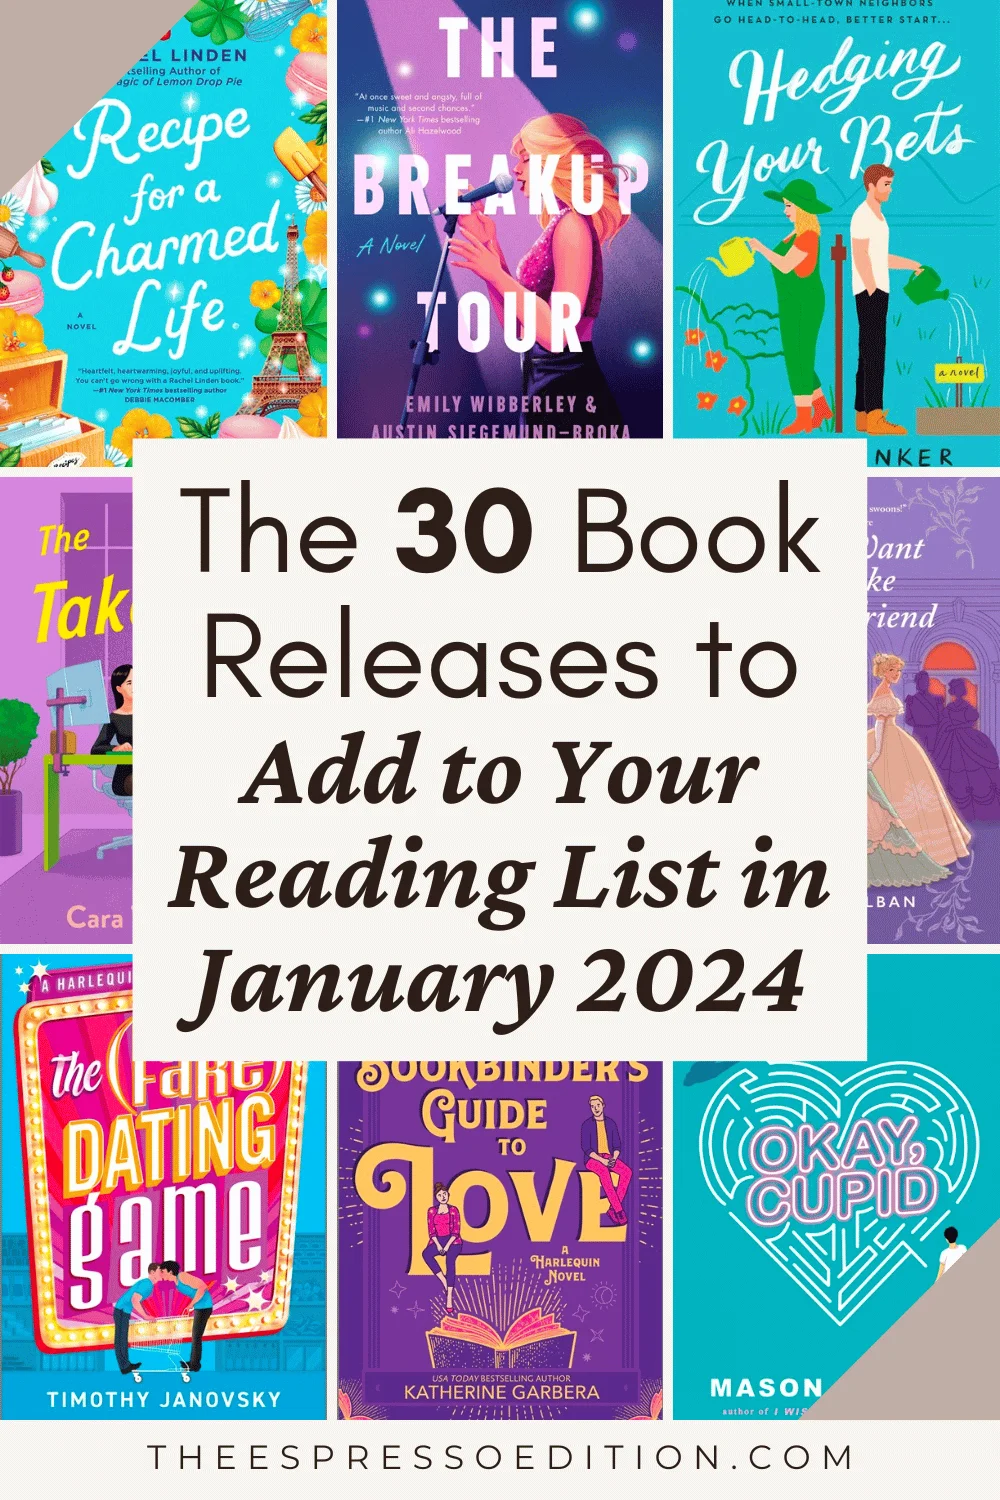 The 30 Book Releases to Add to Your Reading List in January 2024 by The Espresso Edition cozy bookish blog